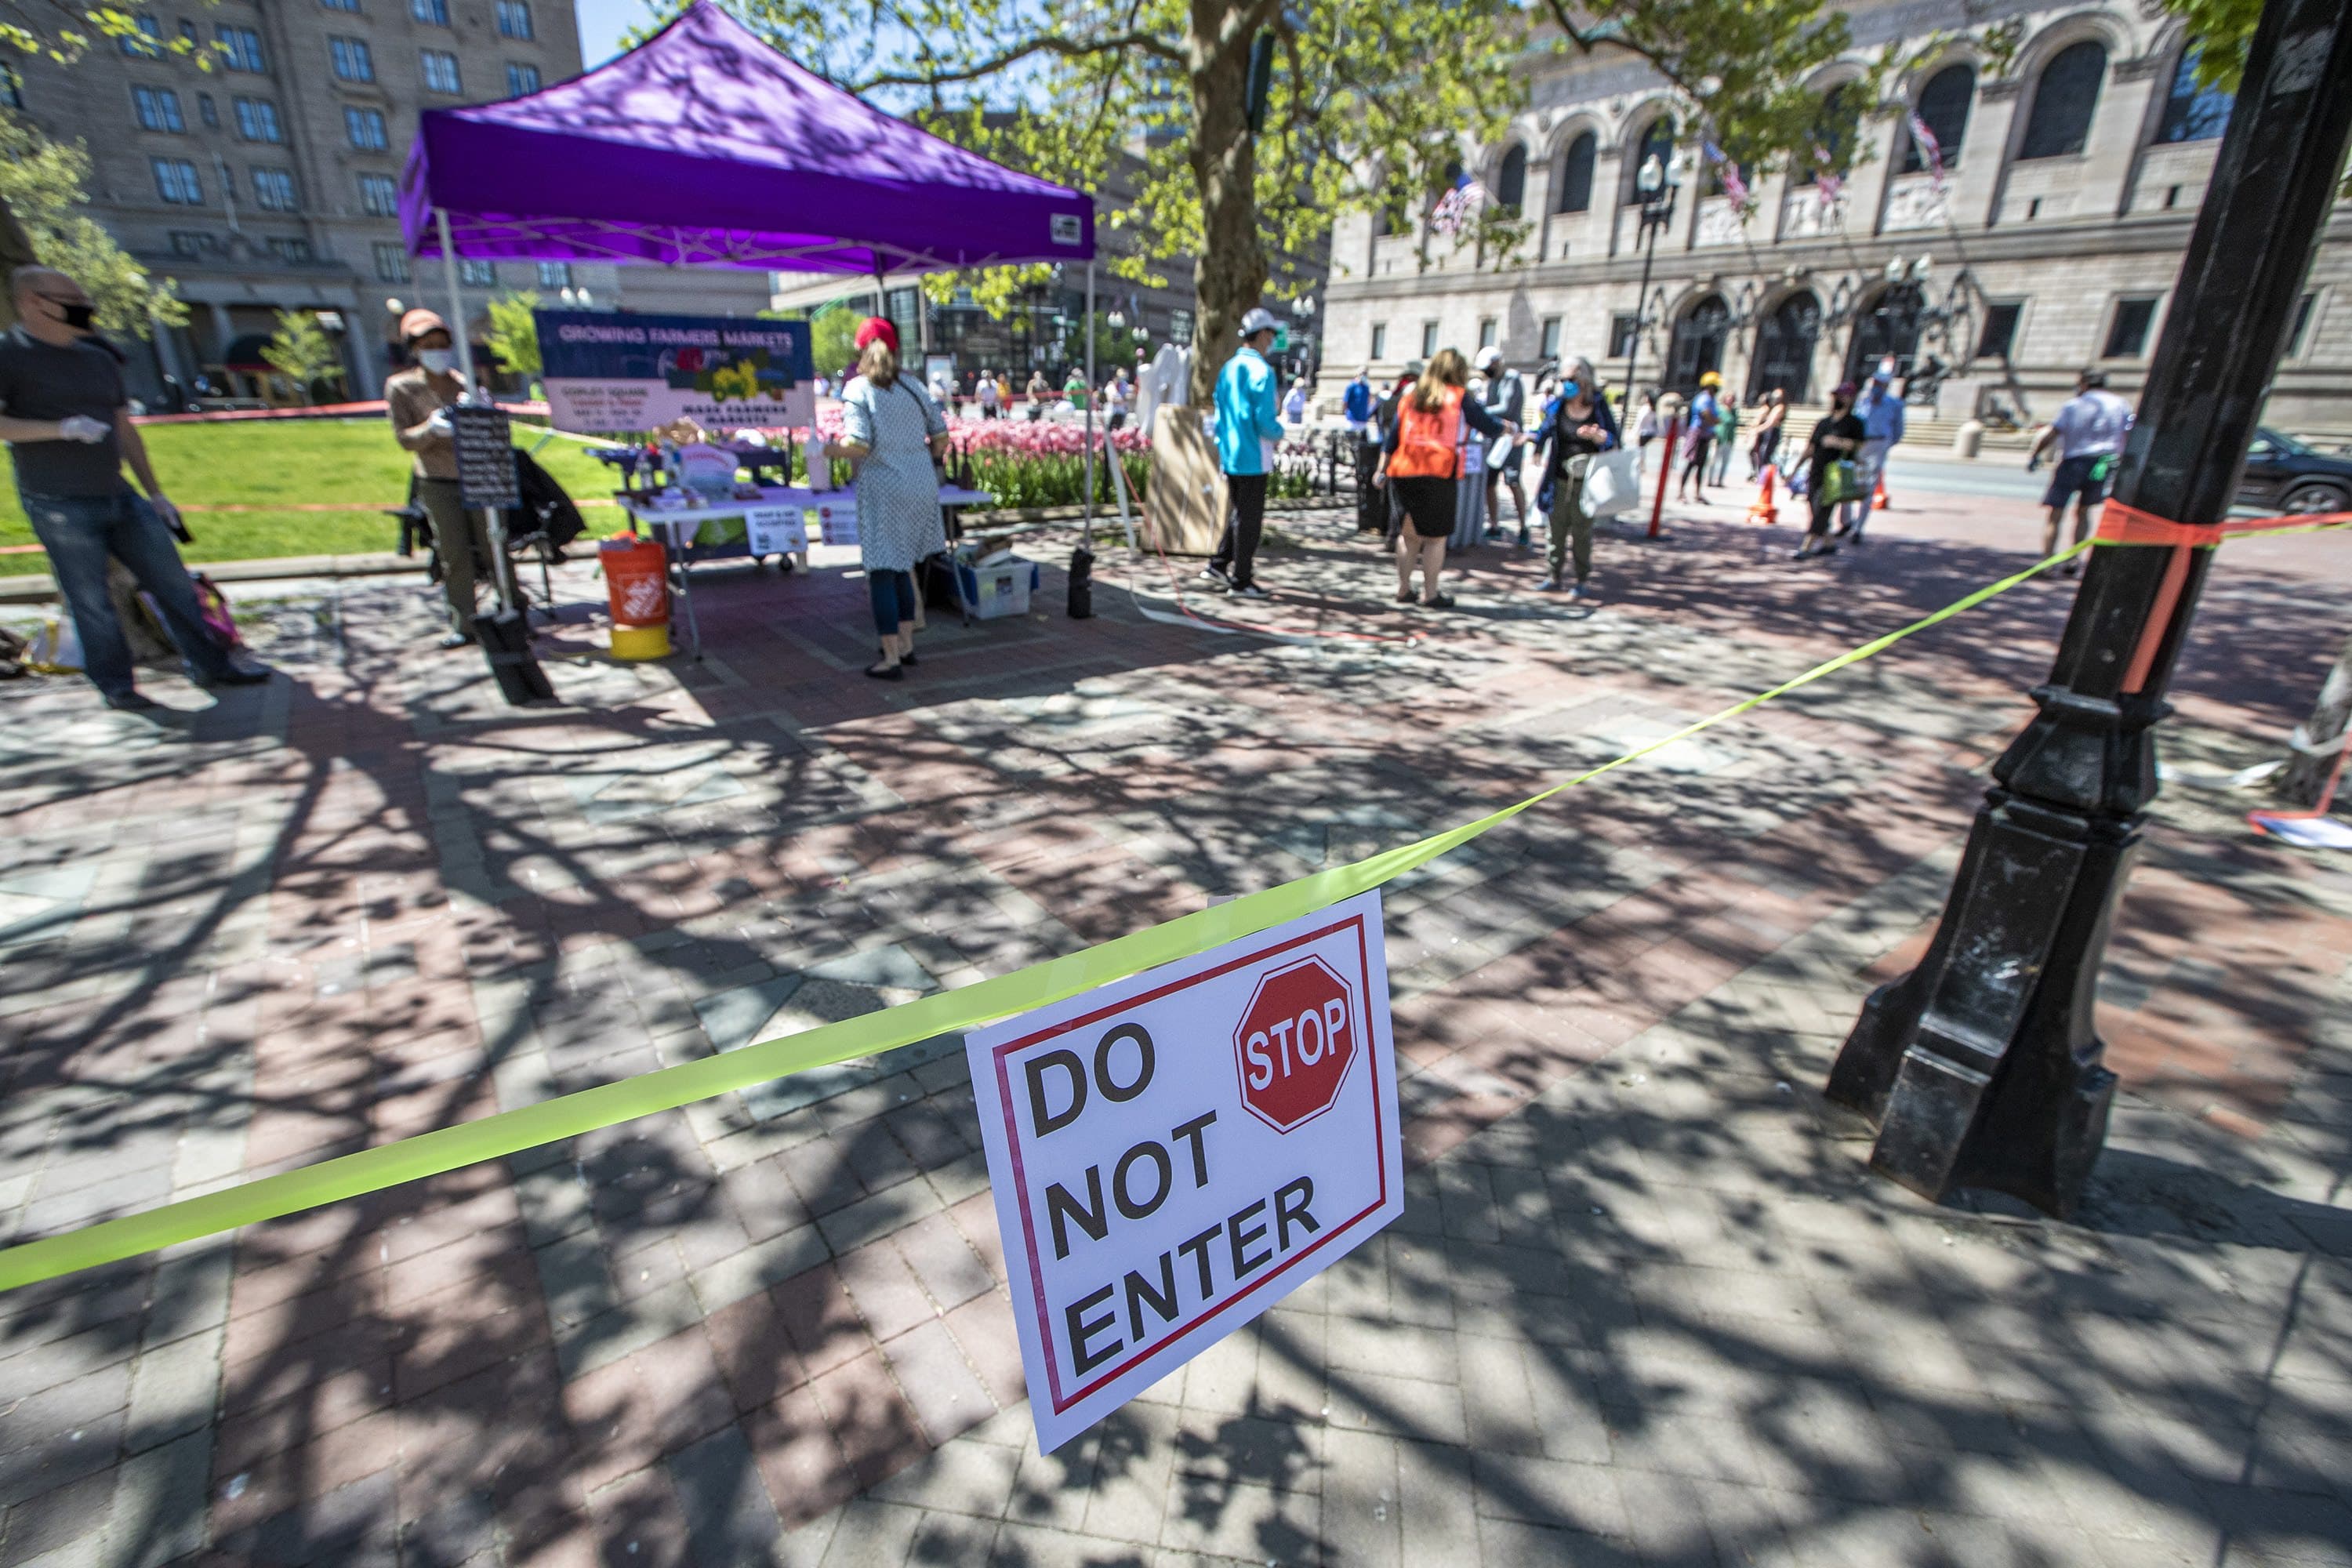 Caution tape surrounds the perimeter of the Copley Square Farmers Market, to keep people entering and exiting through one way, as it got under way Friday. (Jesse Costa/WBUR)